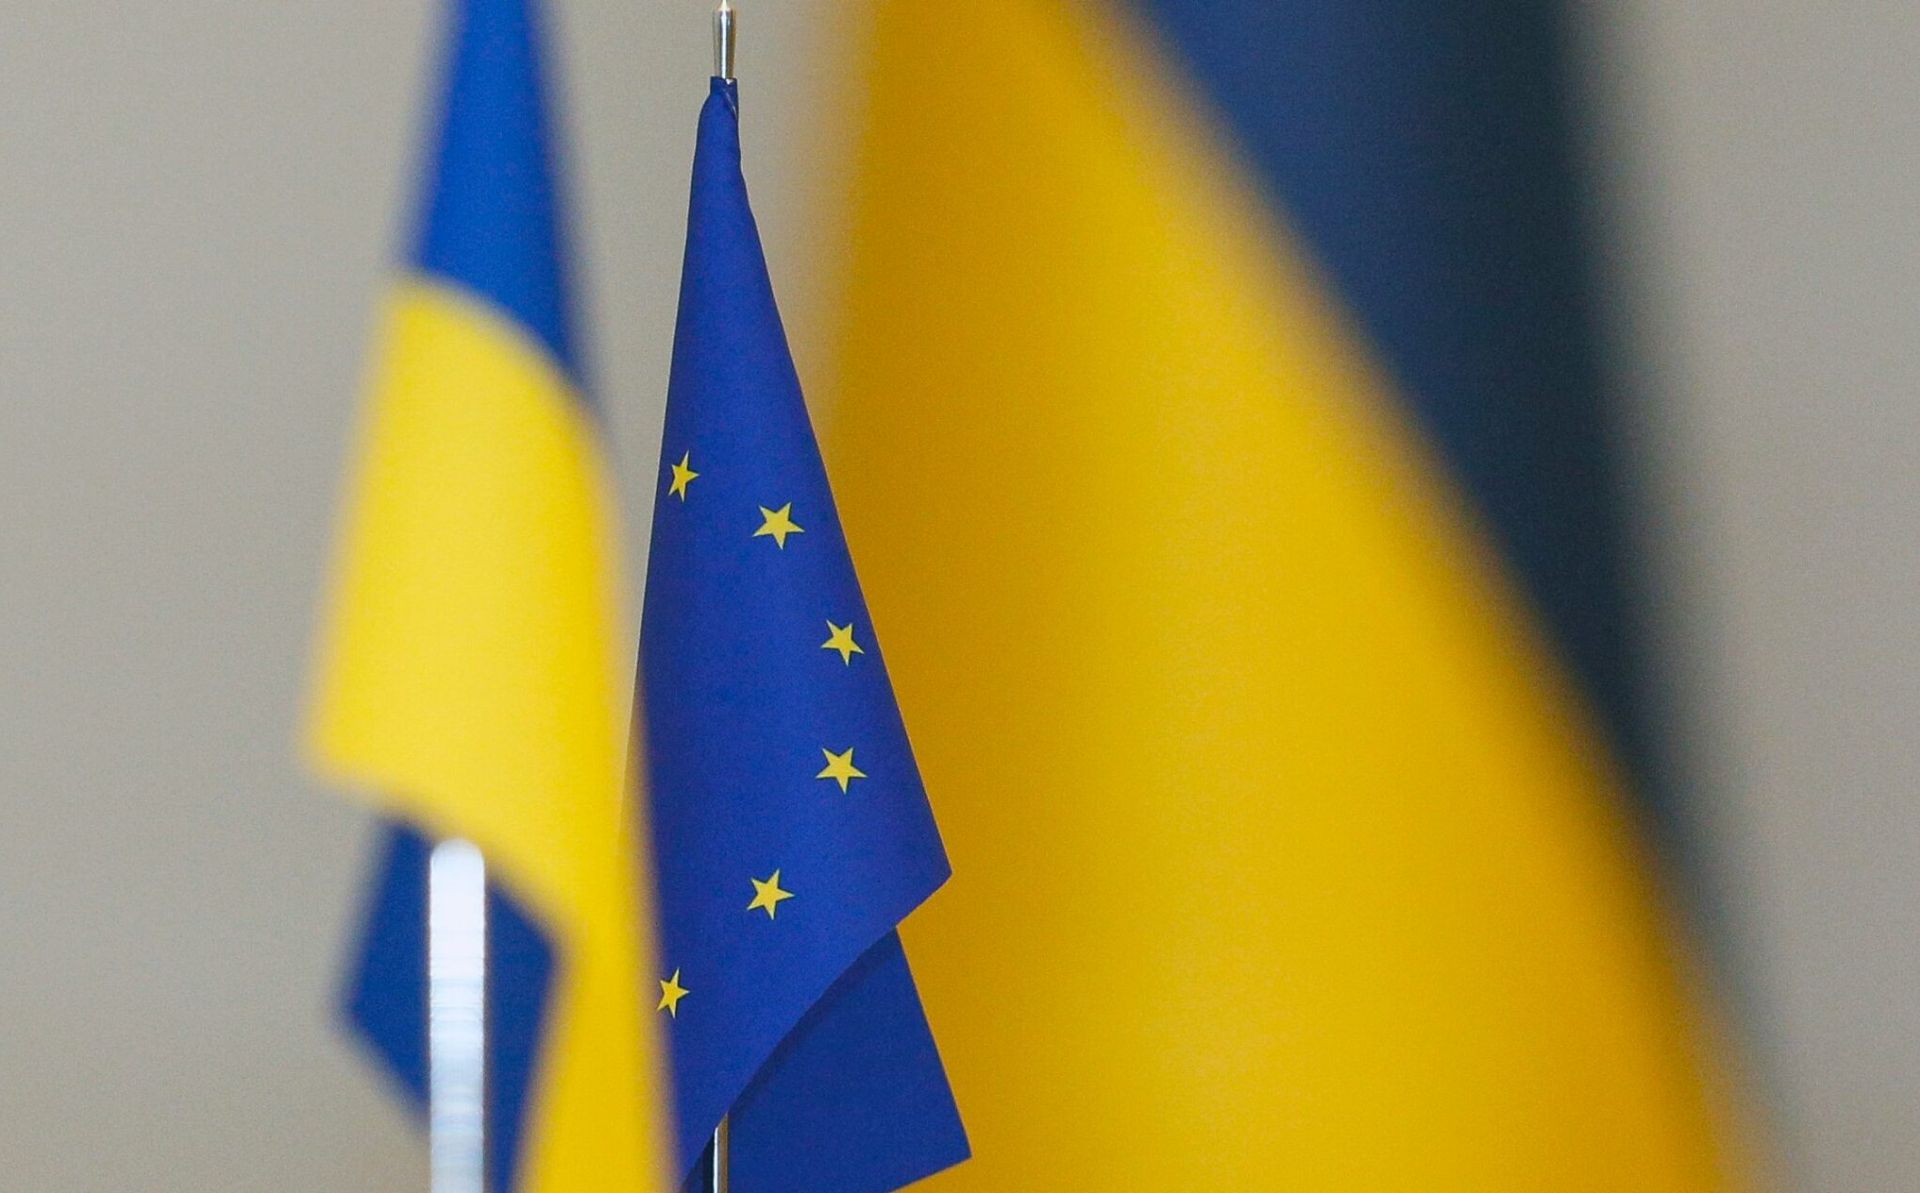 ‘Crimea is Ukraine’: EU does not recognise elections in illegally annexed Crimea